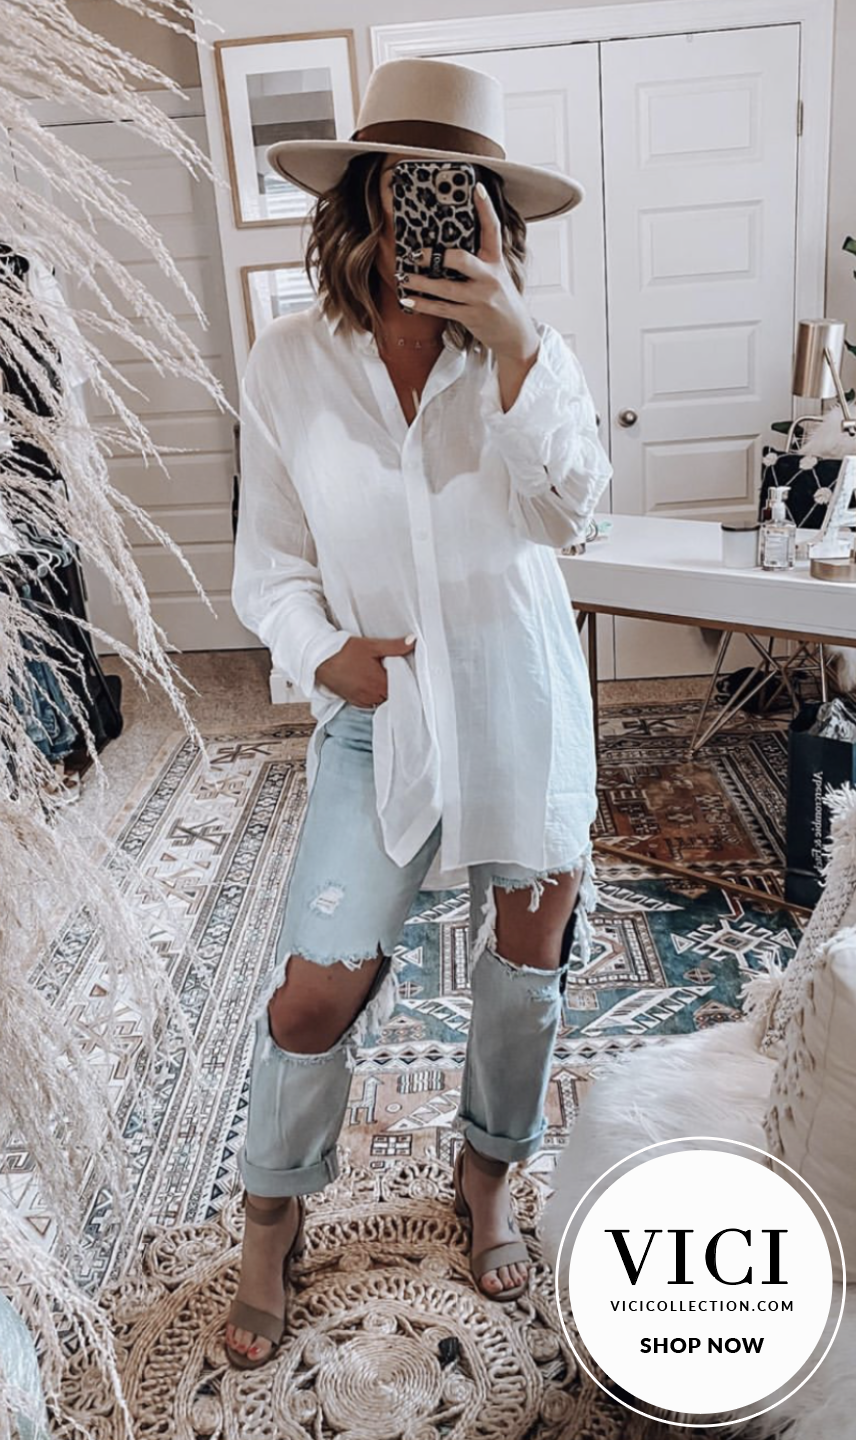 @purposeandpassionblog // VICIDOLLS // Shop Daily VICI New Arrivals // Chic + On Trend // - @purposeandpassionblog // VICIDOLLS // Shop Daily VICI New Arrivals // Chic + On Trend // -   16 style Outfits night ideas